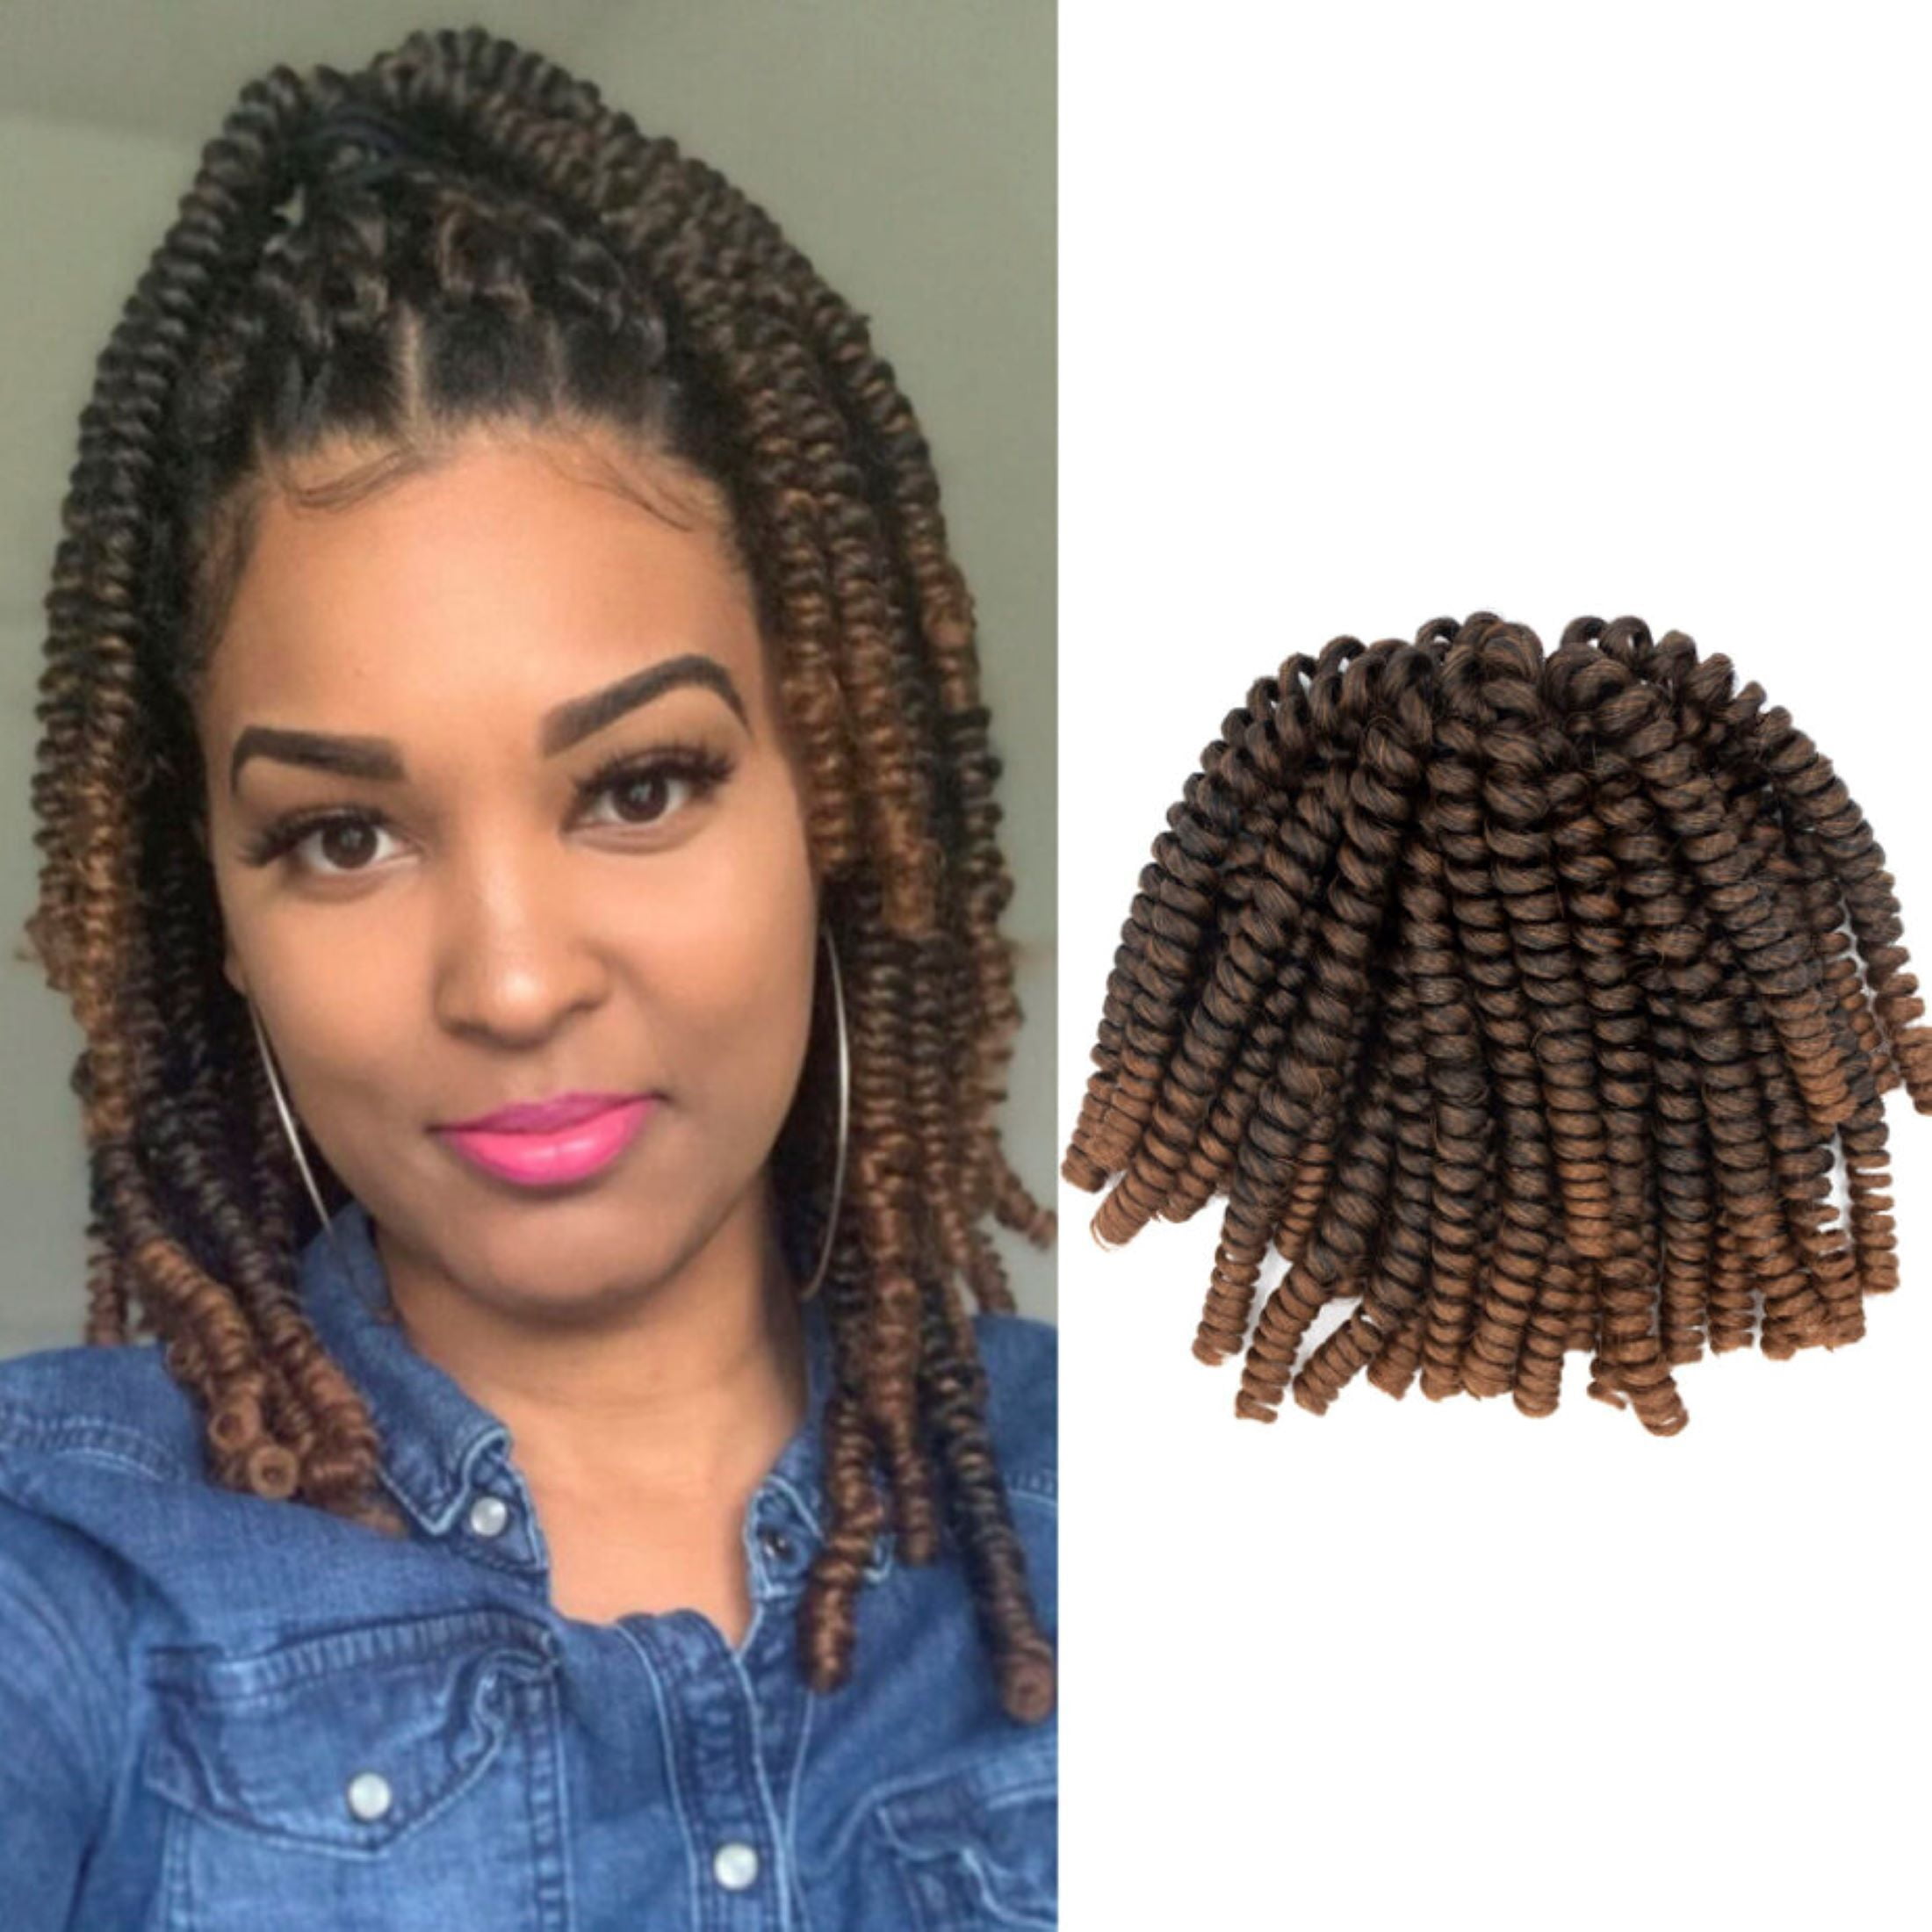 How to EASY Passion Twists : No Rubber Band 